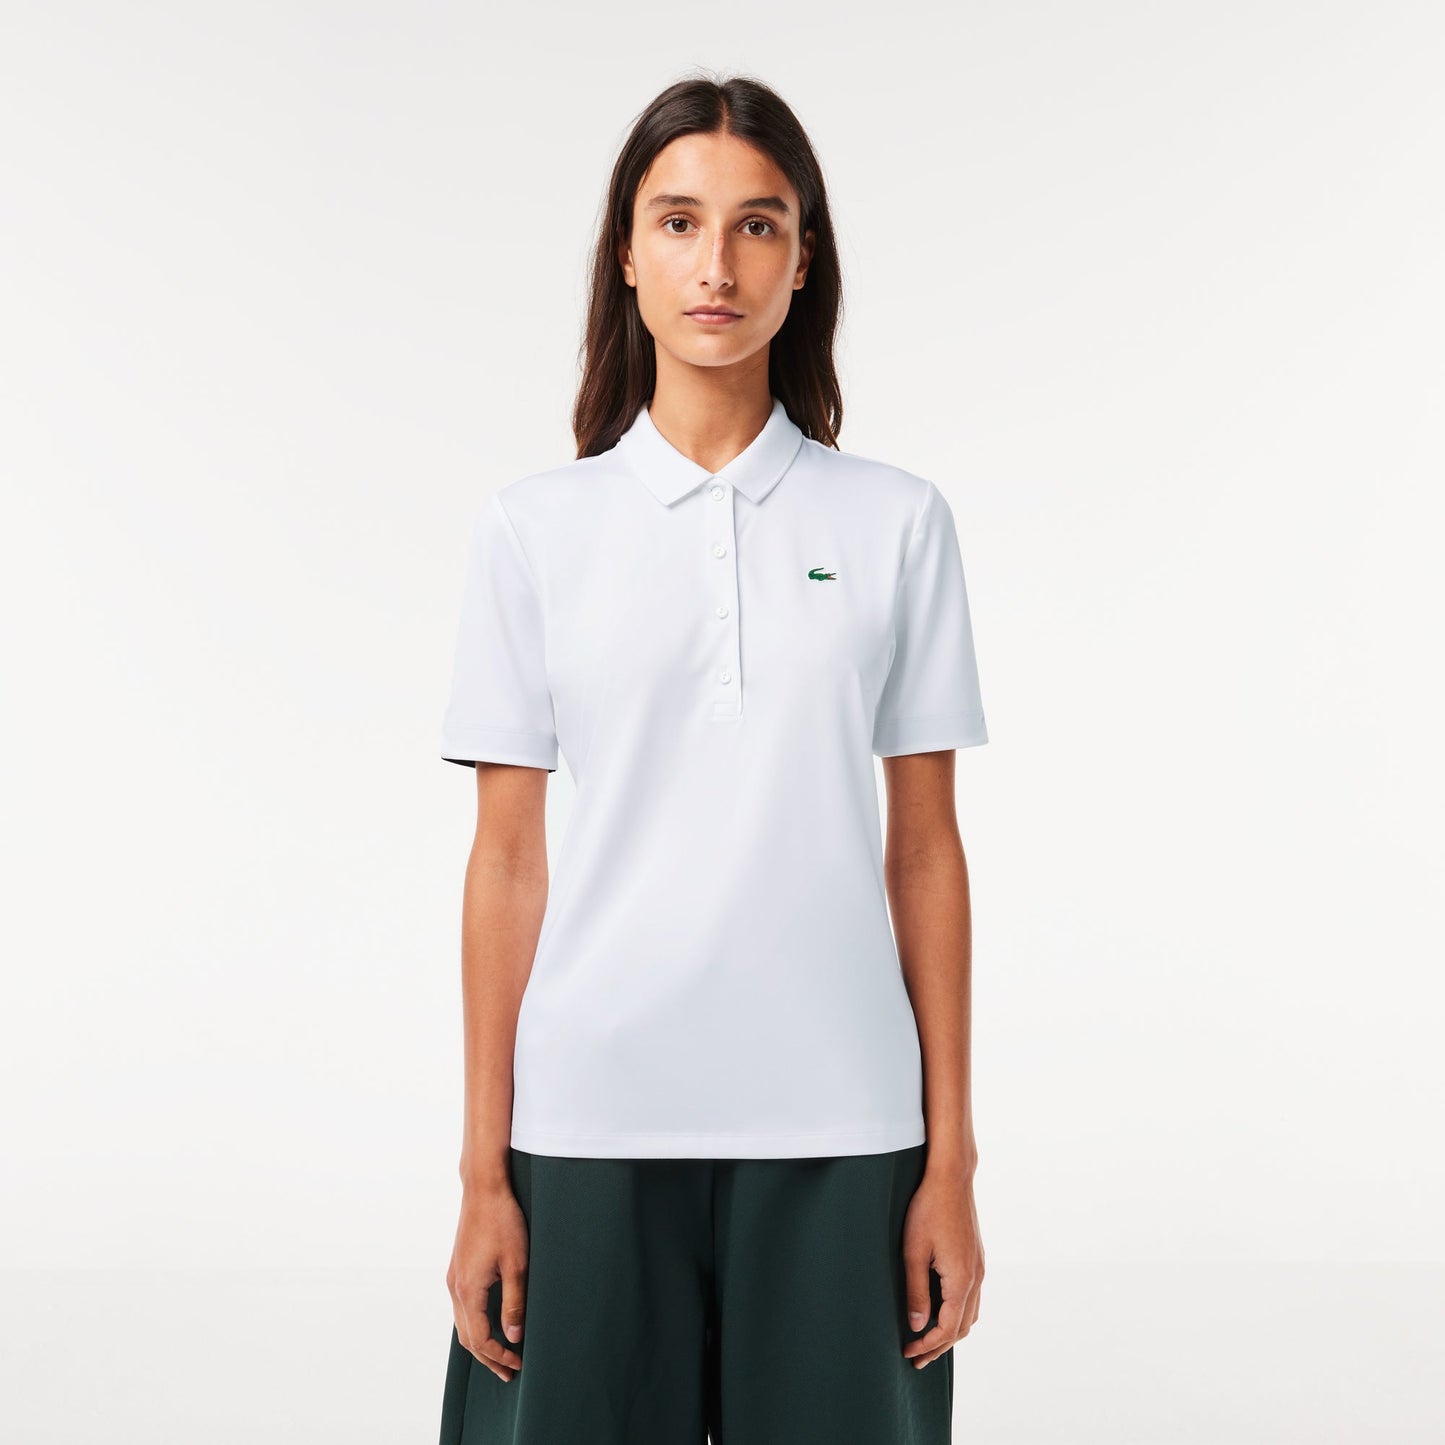 Women's Lacoste SPORT Breathable Stretch Golf Polo Shirt - PF5179